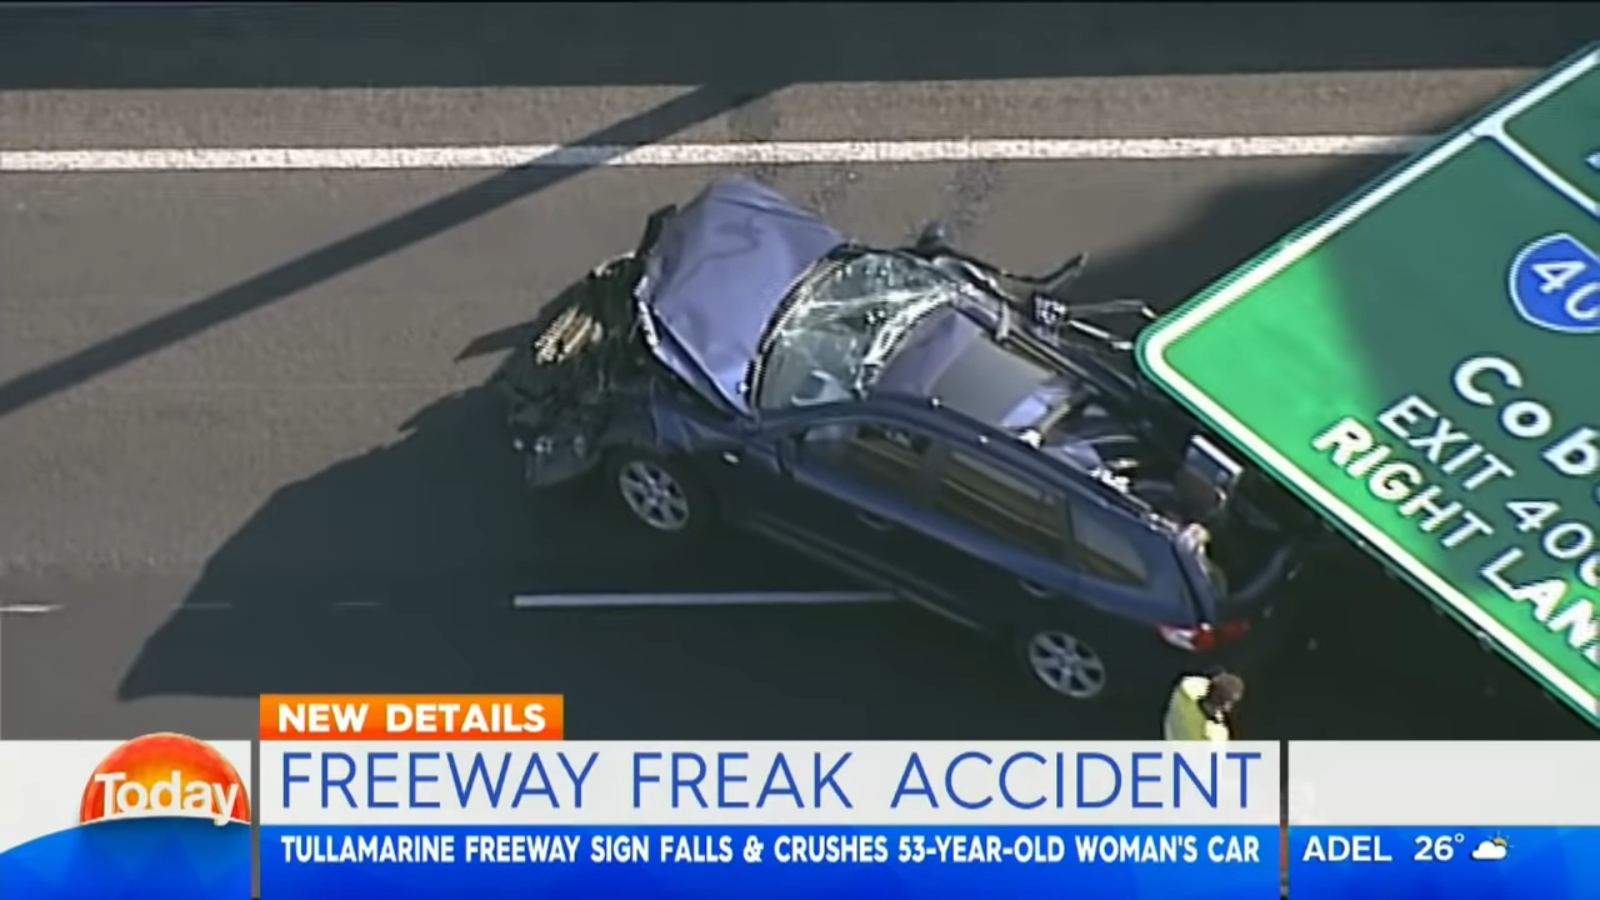 Final Destination-style freak accident on Australian highway causes overhead sign to crush SUV